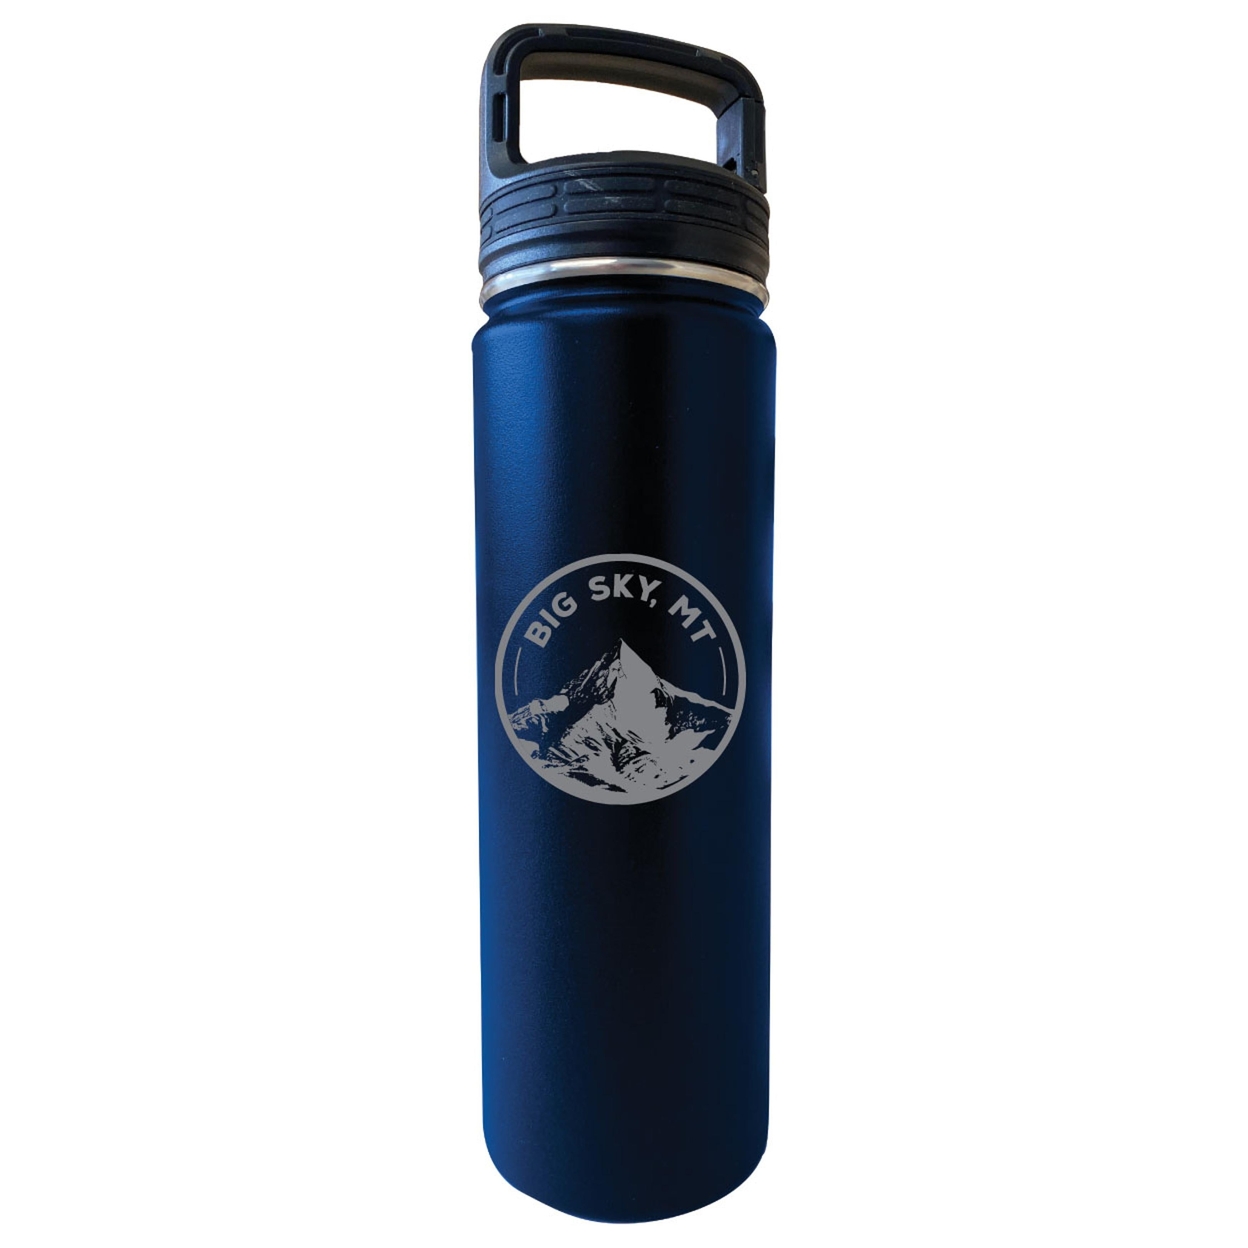 Big Sky Montana Souvenir 32 Oz Engraved Insulated Stainless Steel Tumbler - Navy,,4-Pack